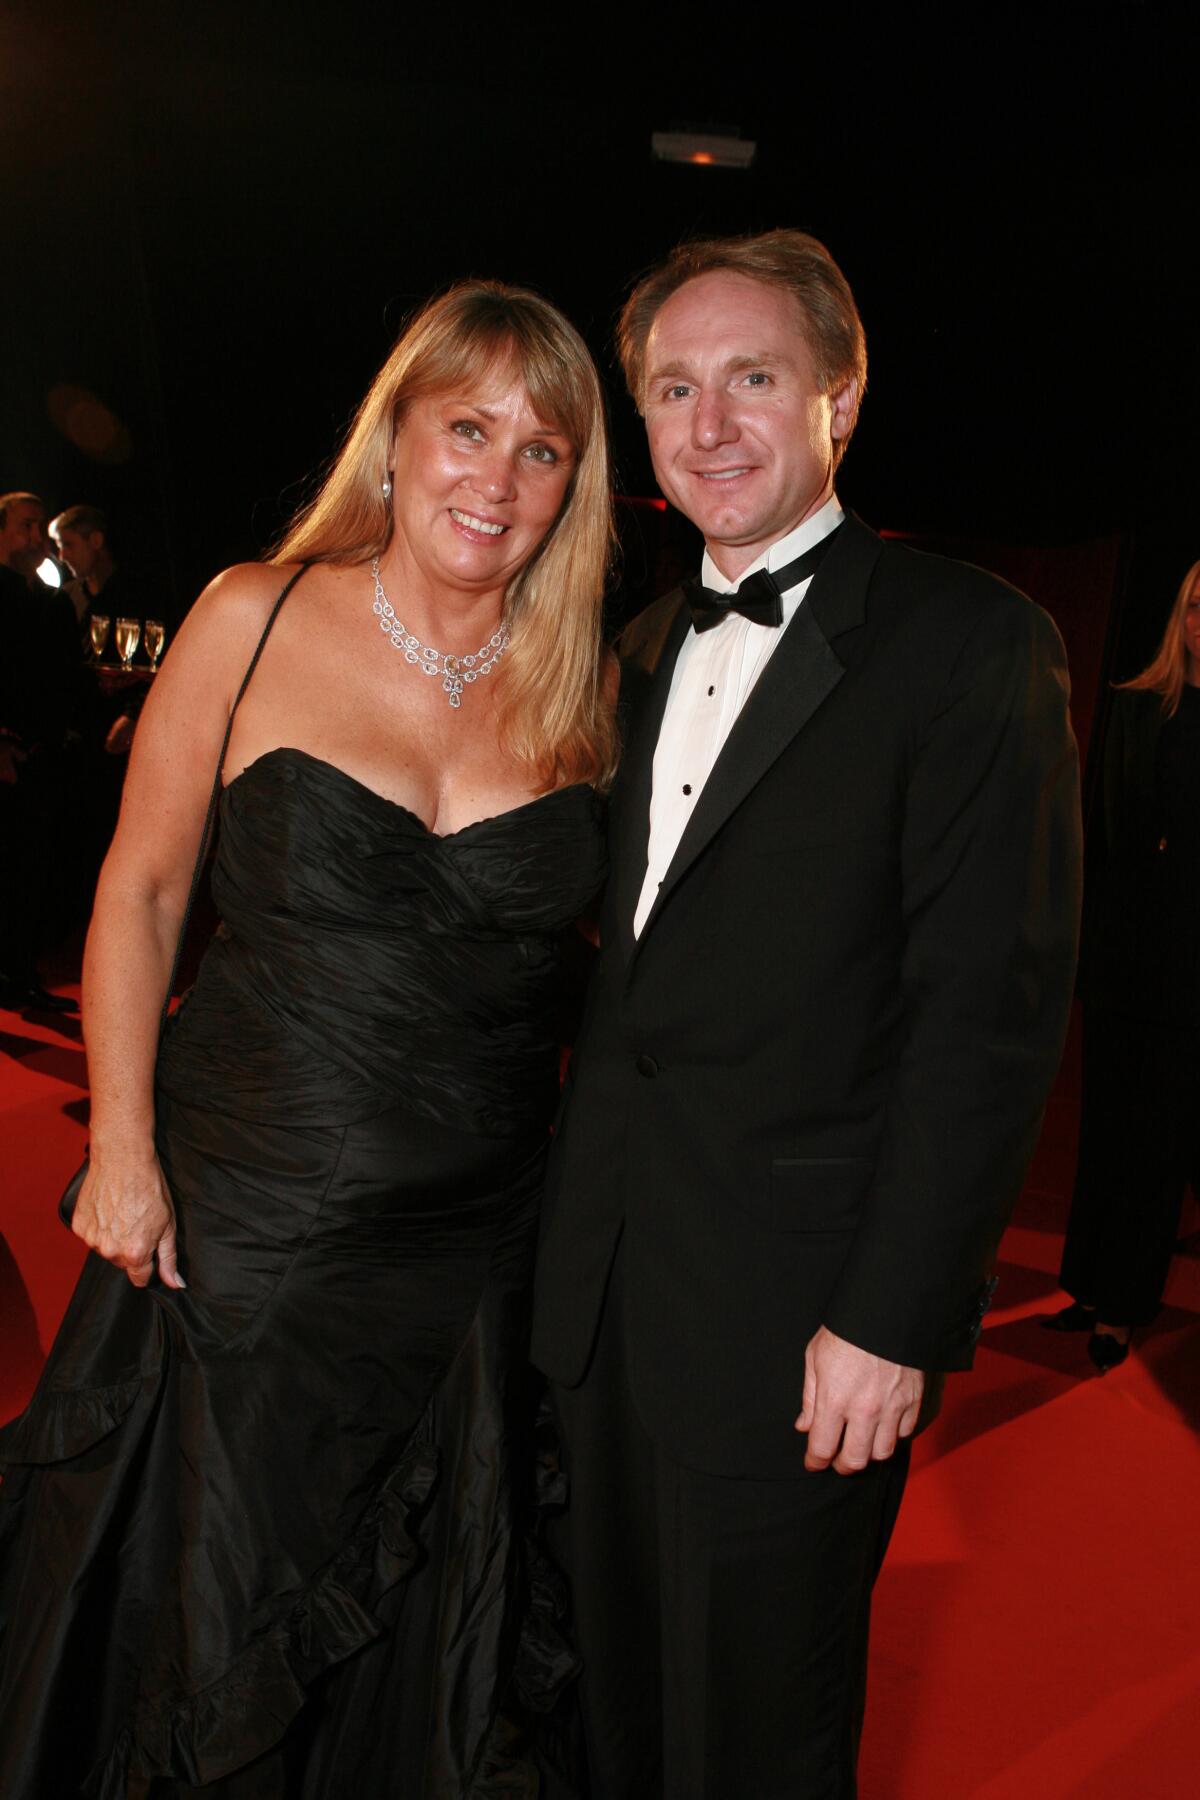 A woman in a black gown, right, and a man in a tuxedo